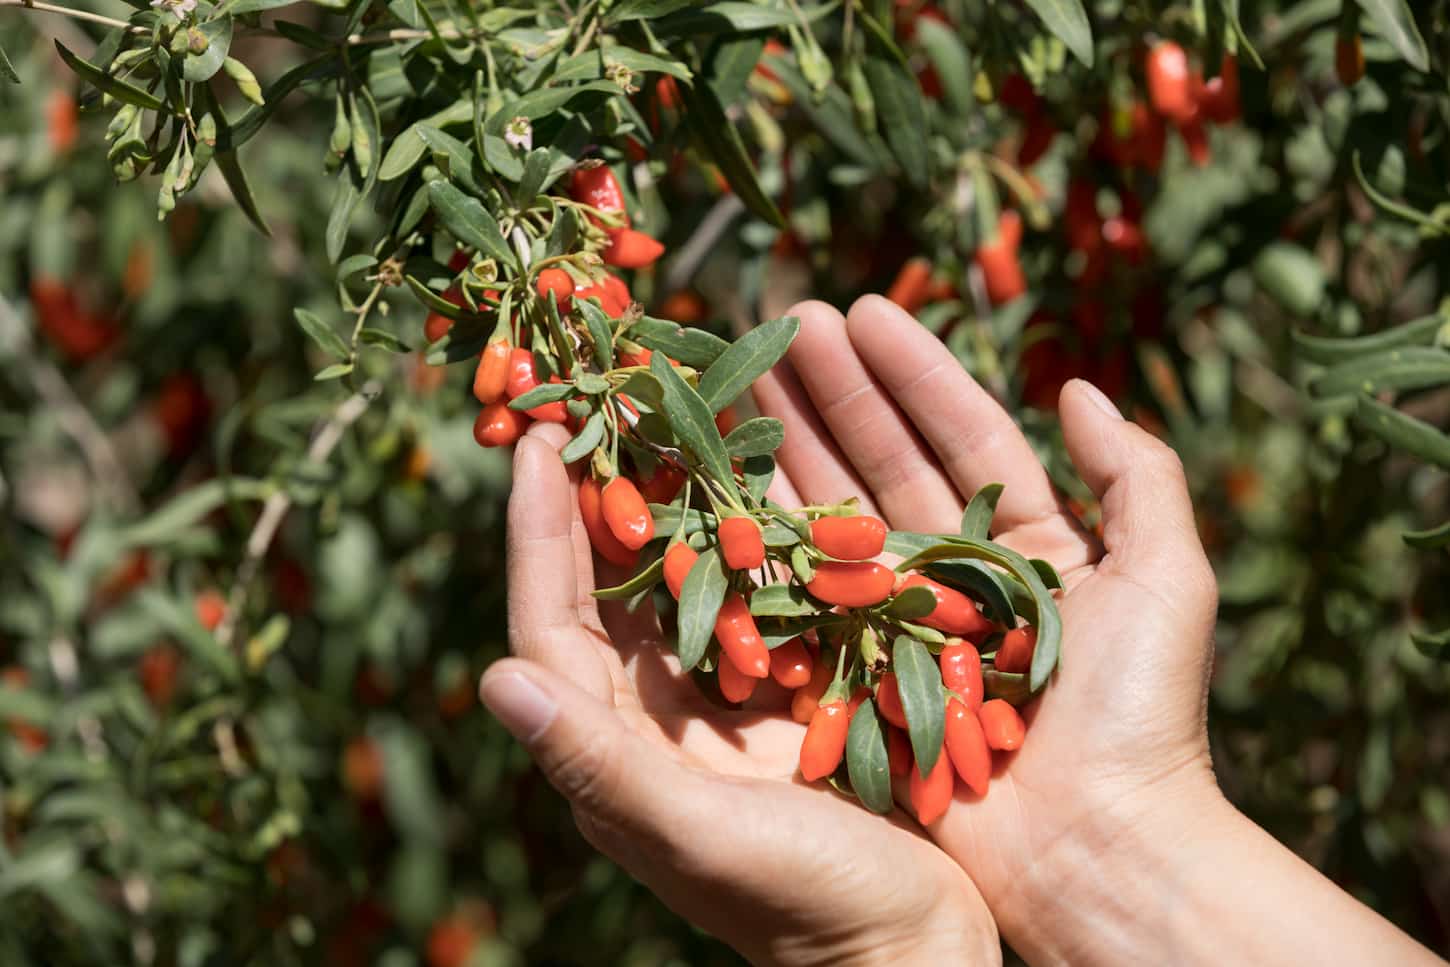 An image of a woman's hands holding goji berries in the garden.